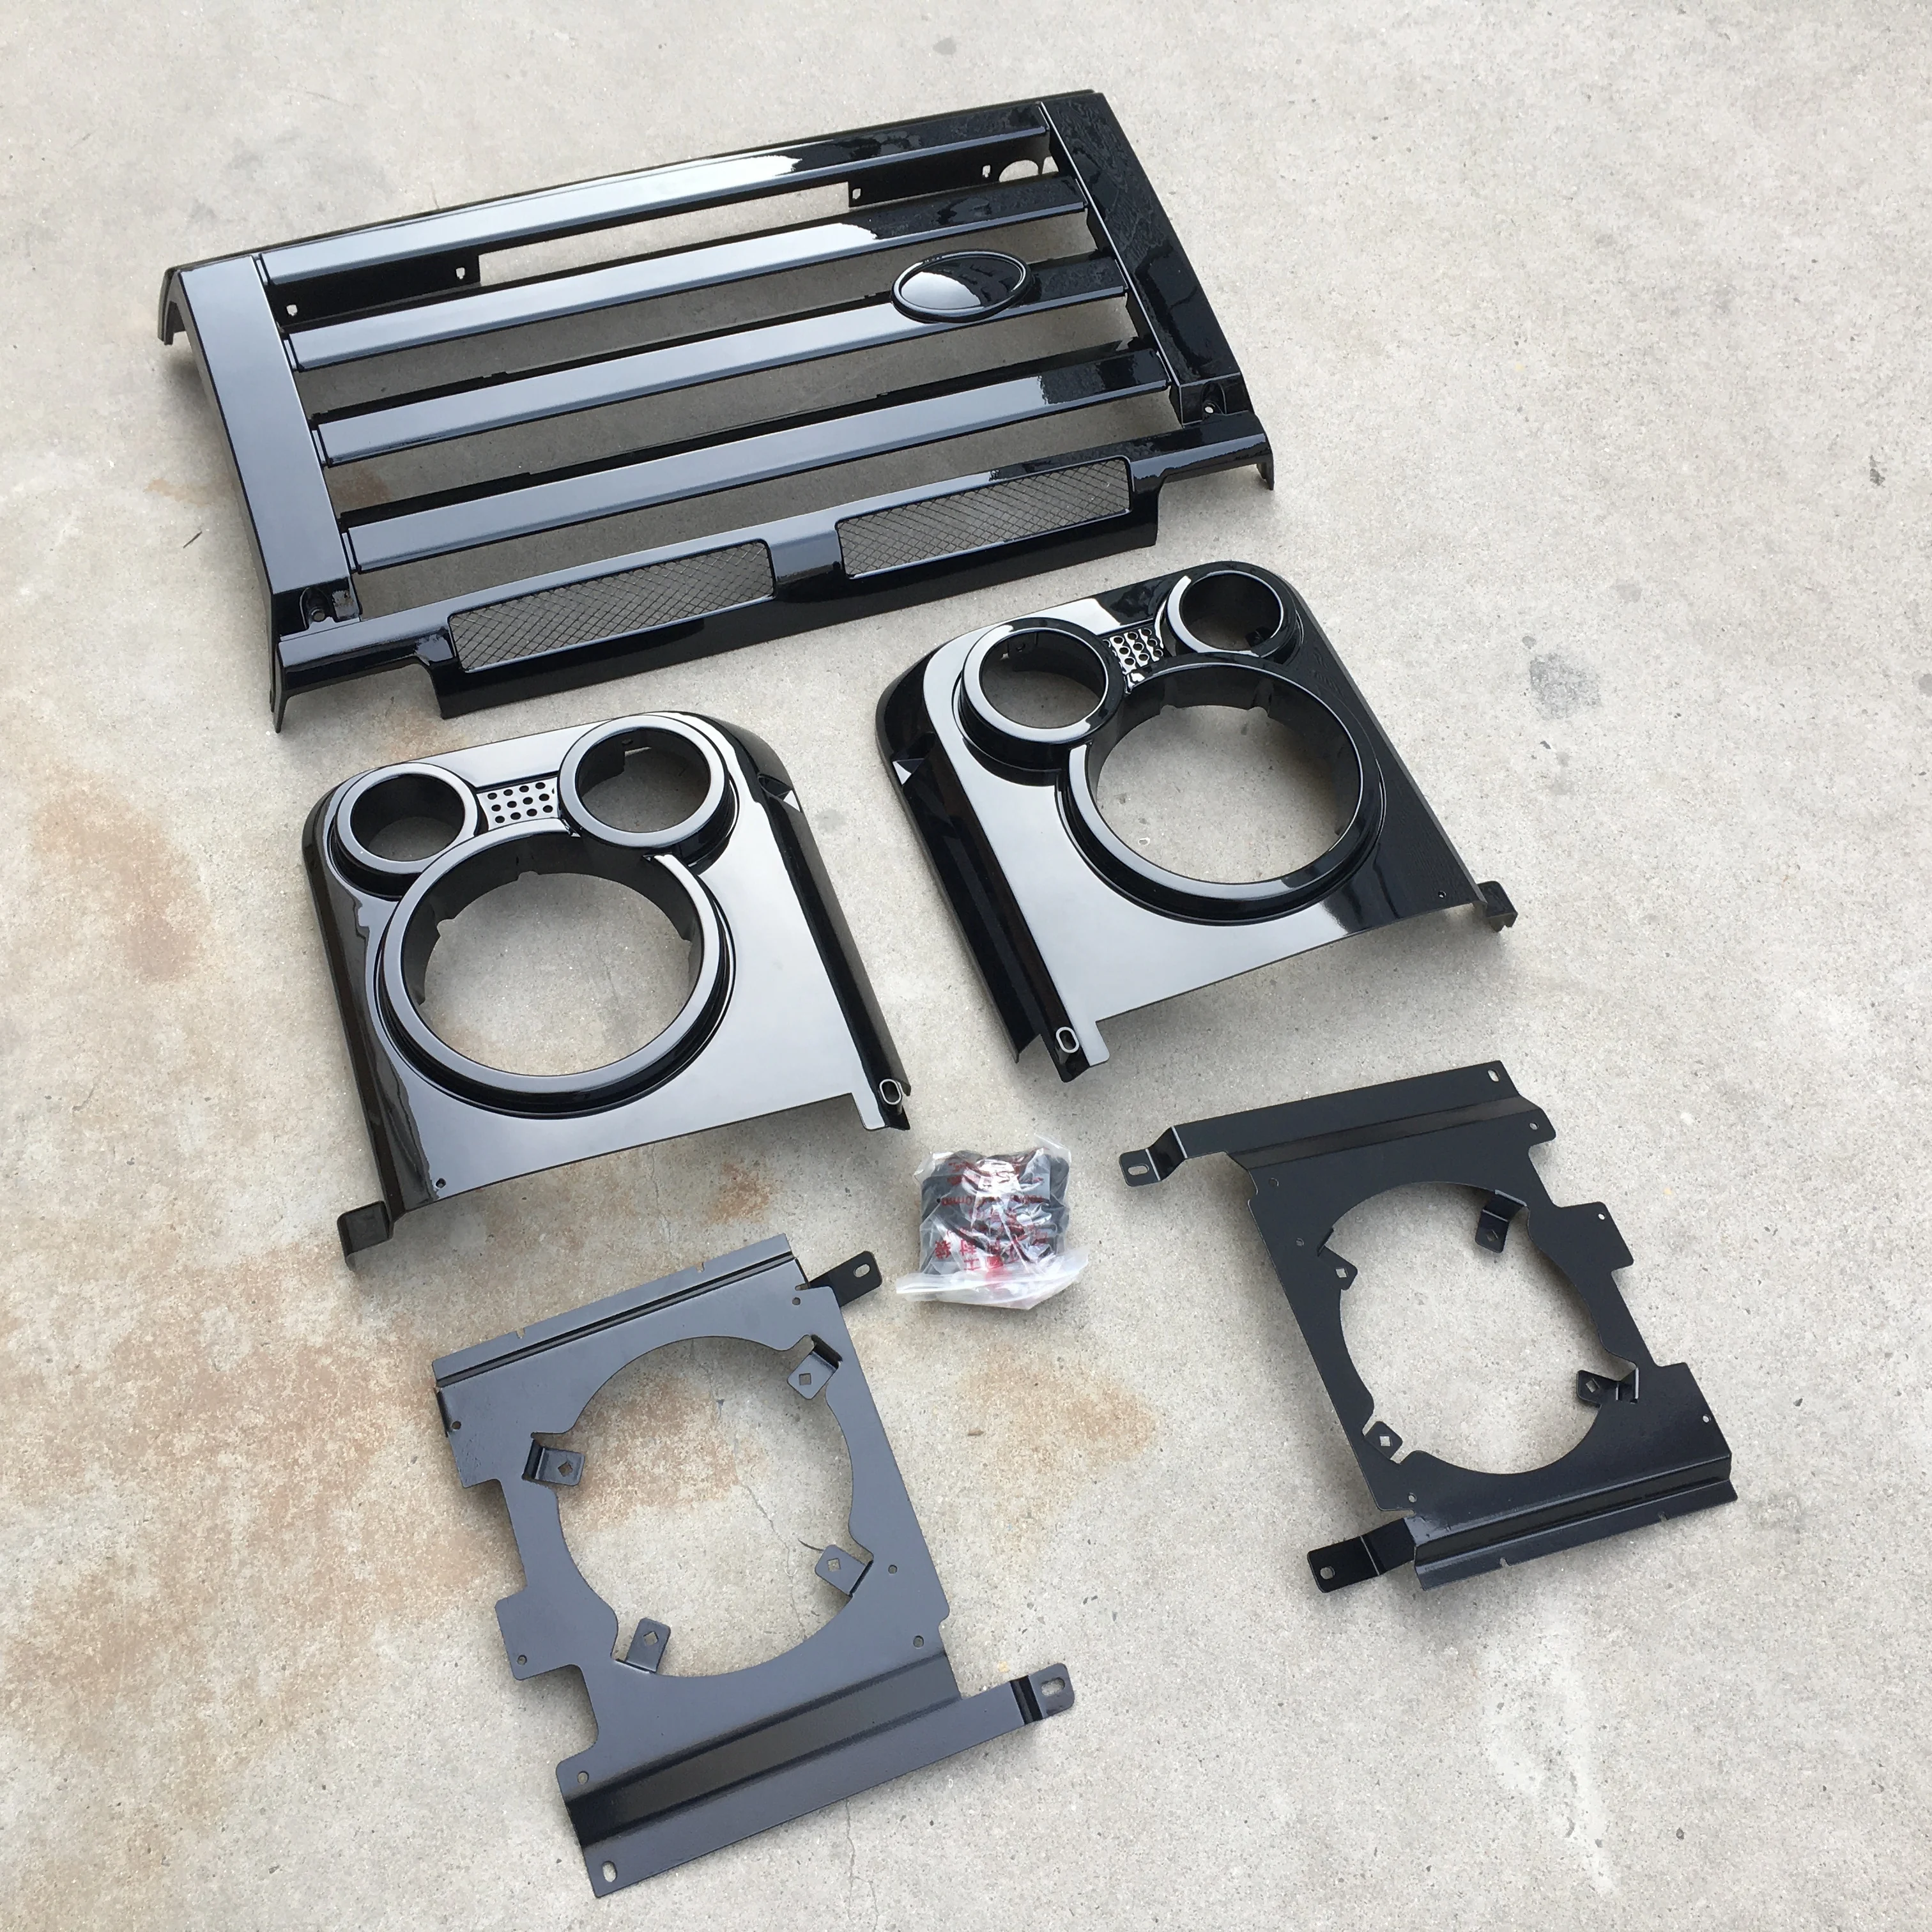 

For Land Rover Defender 90/110 Grile SVX Black & Silver From BDL Company In China